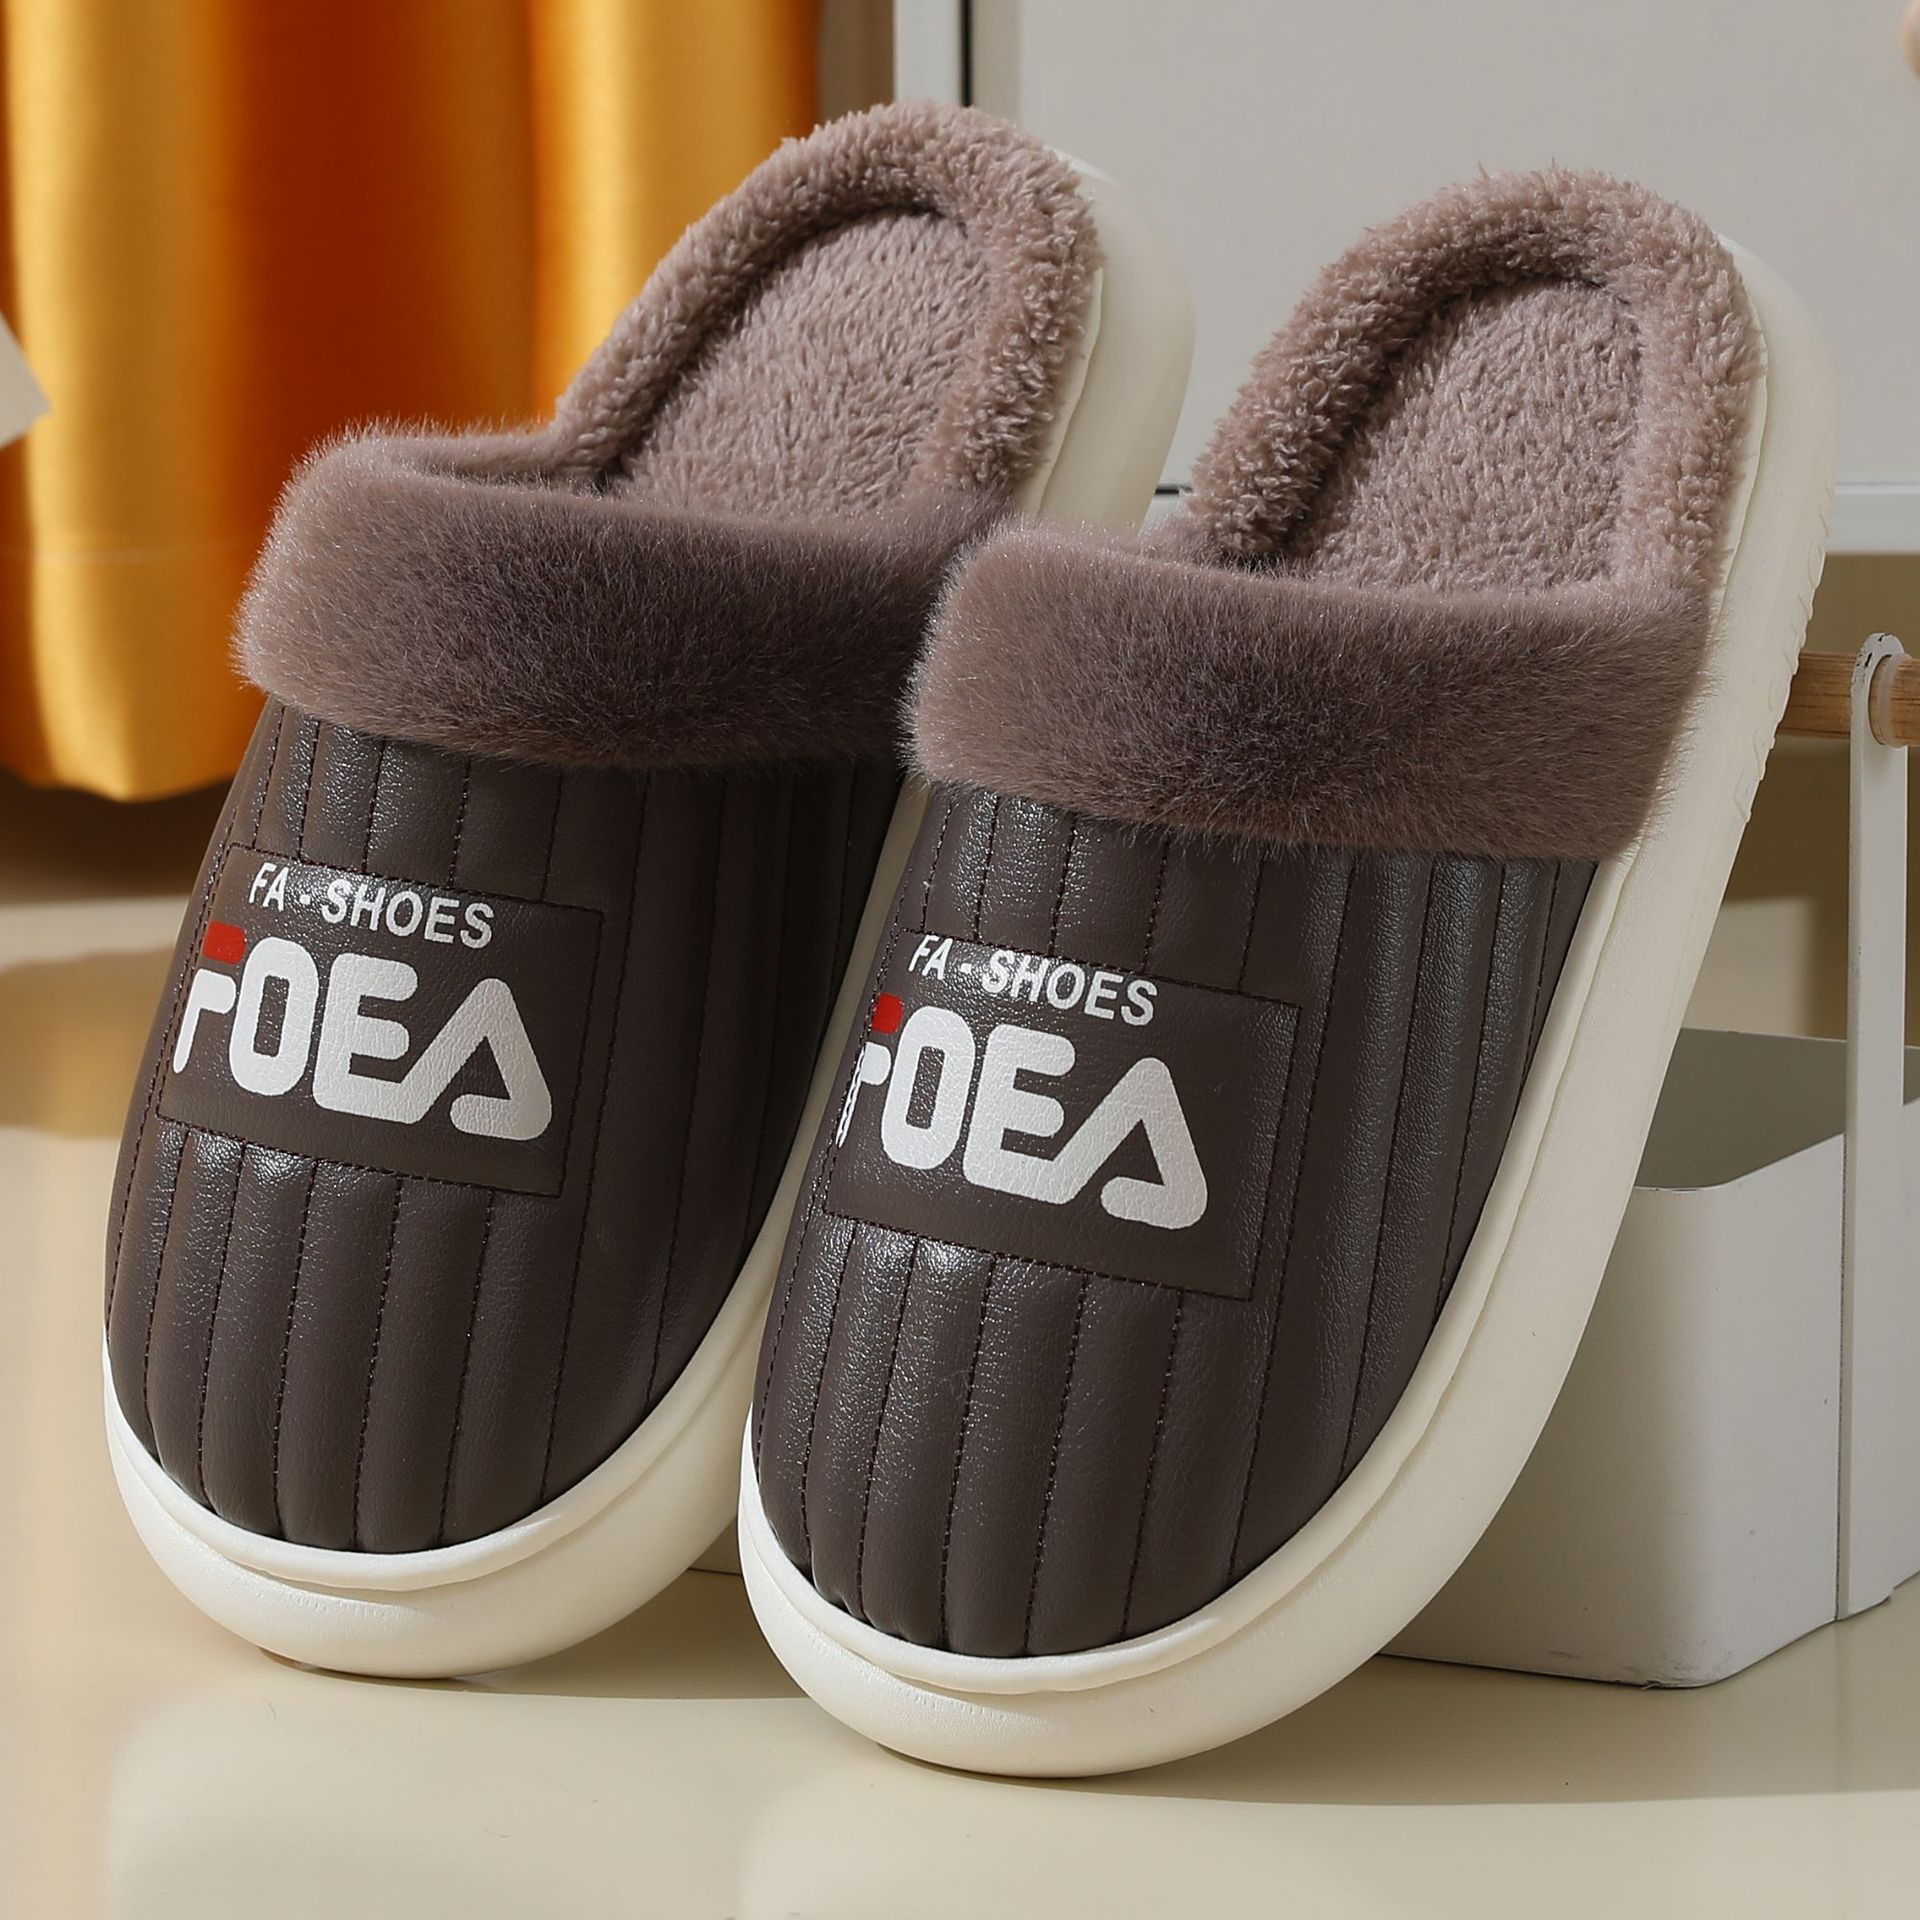 Leather waterproof Cotton slippers Autumn and winter indoor Home keep warm The thickness of the bottom Lovers money PU Fur slipper winter